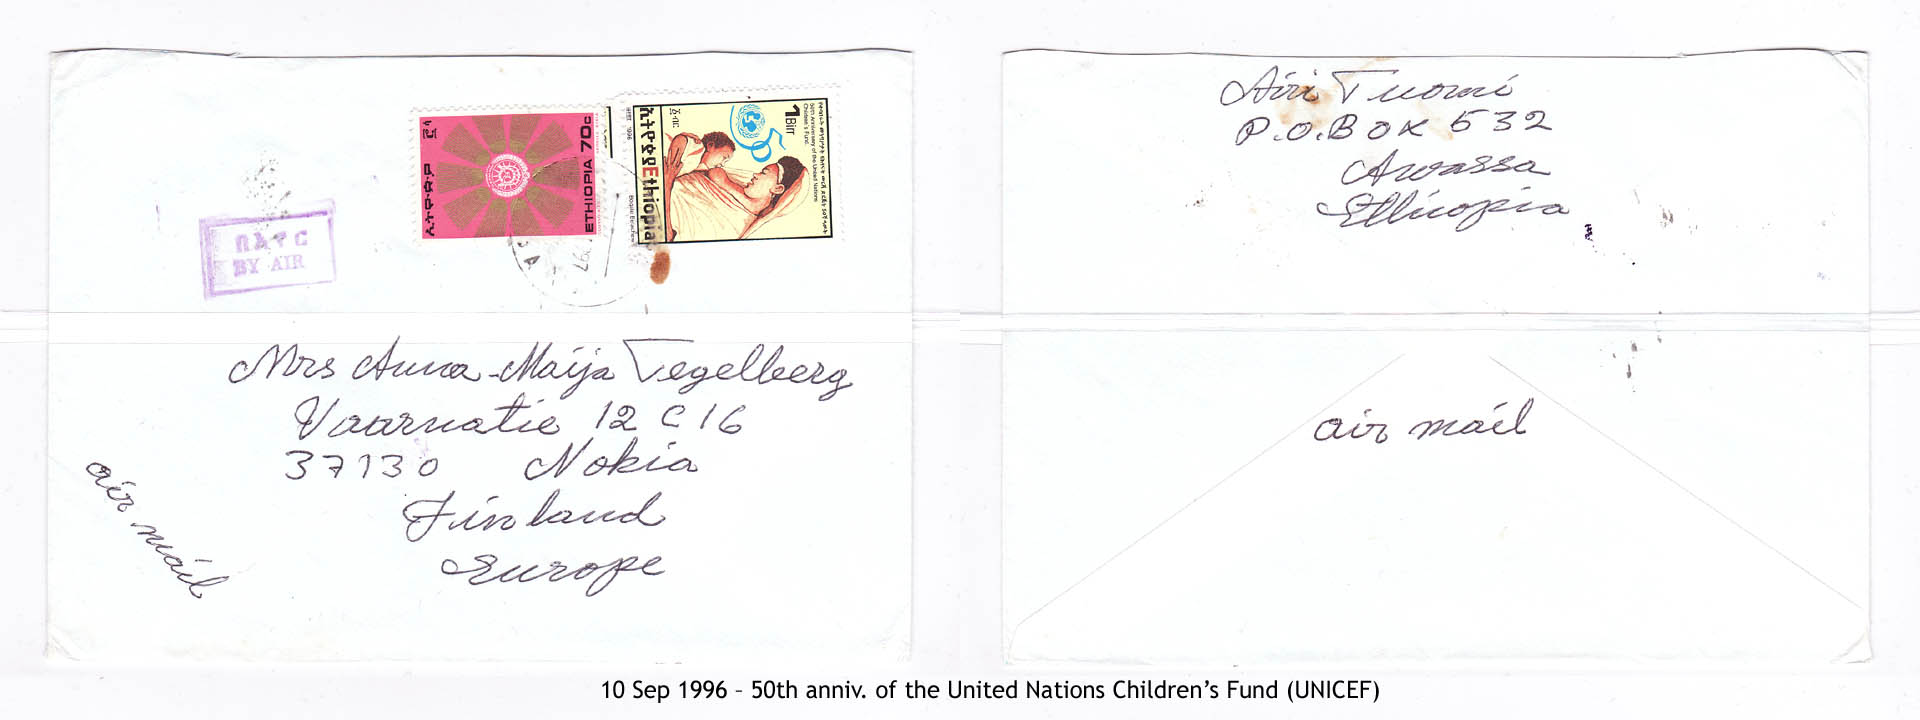 19960910 – 50th anniv. of the United Nations Children’s Fund (UNICEF)